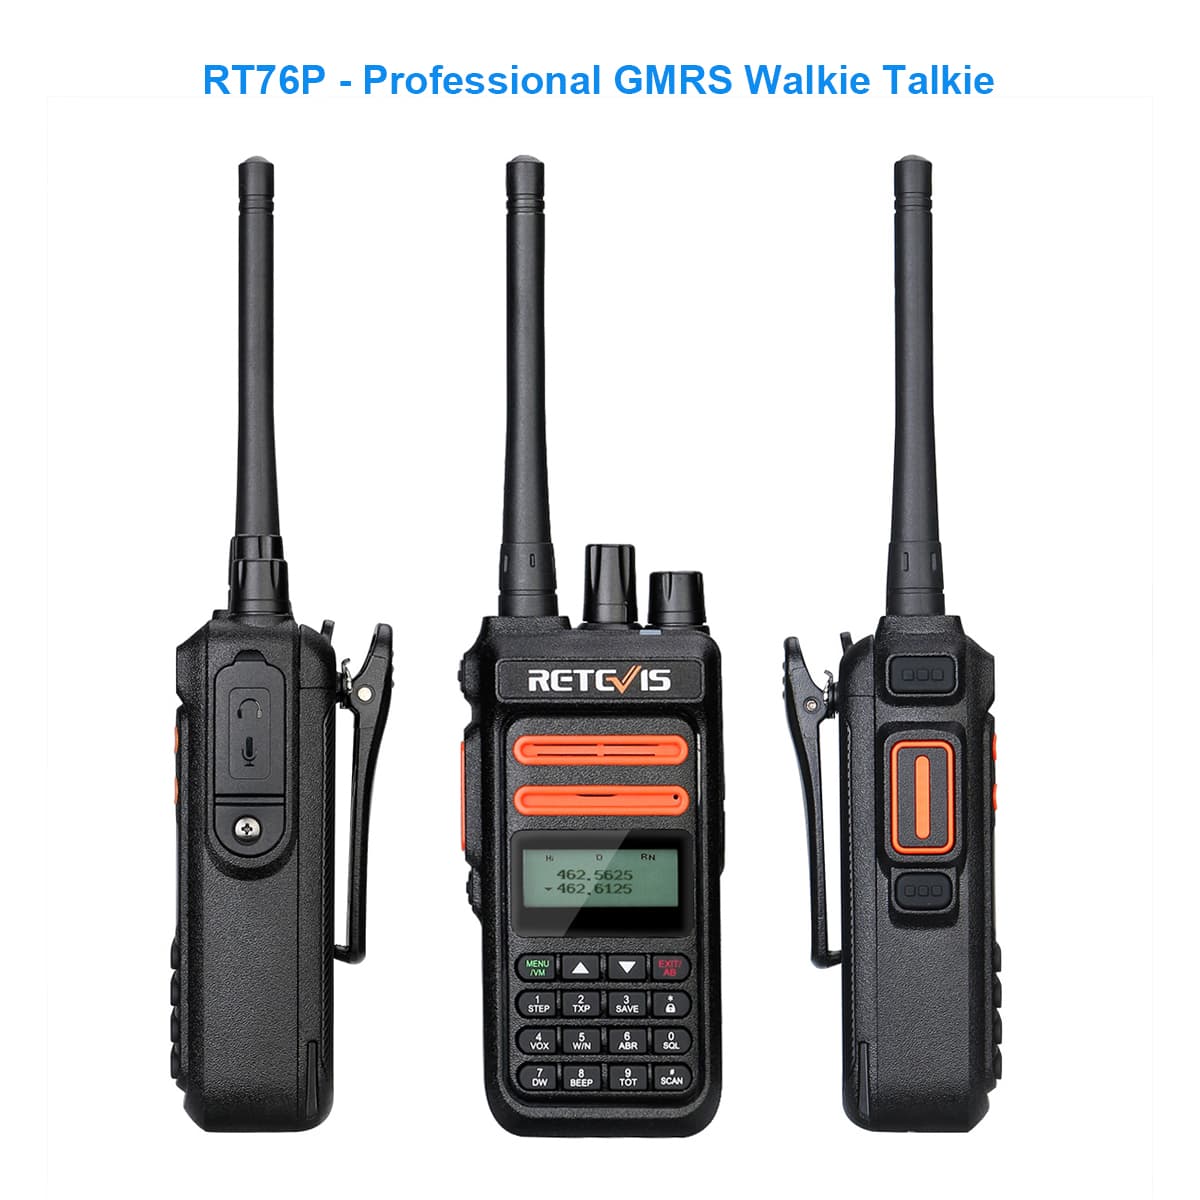 Professional GMRS walkie talkie-RT76P